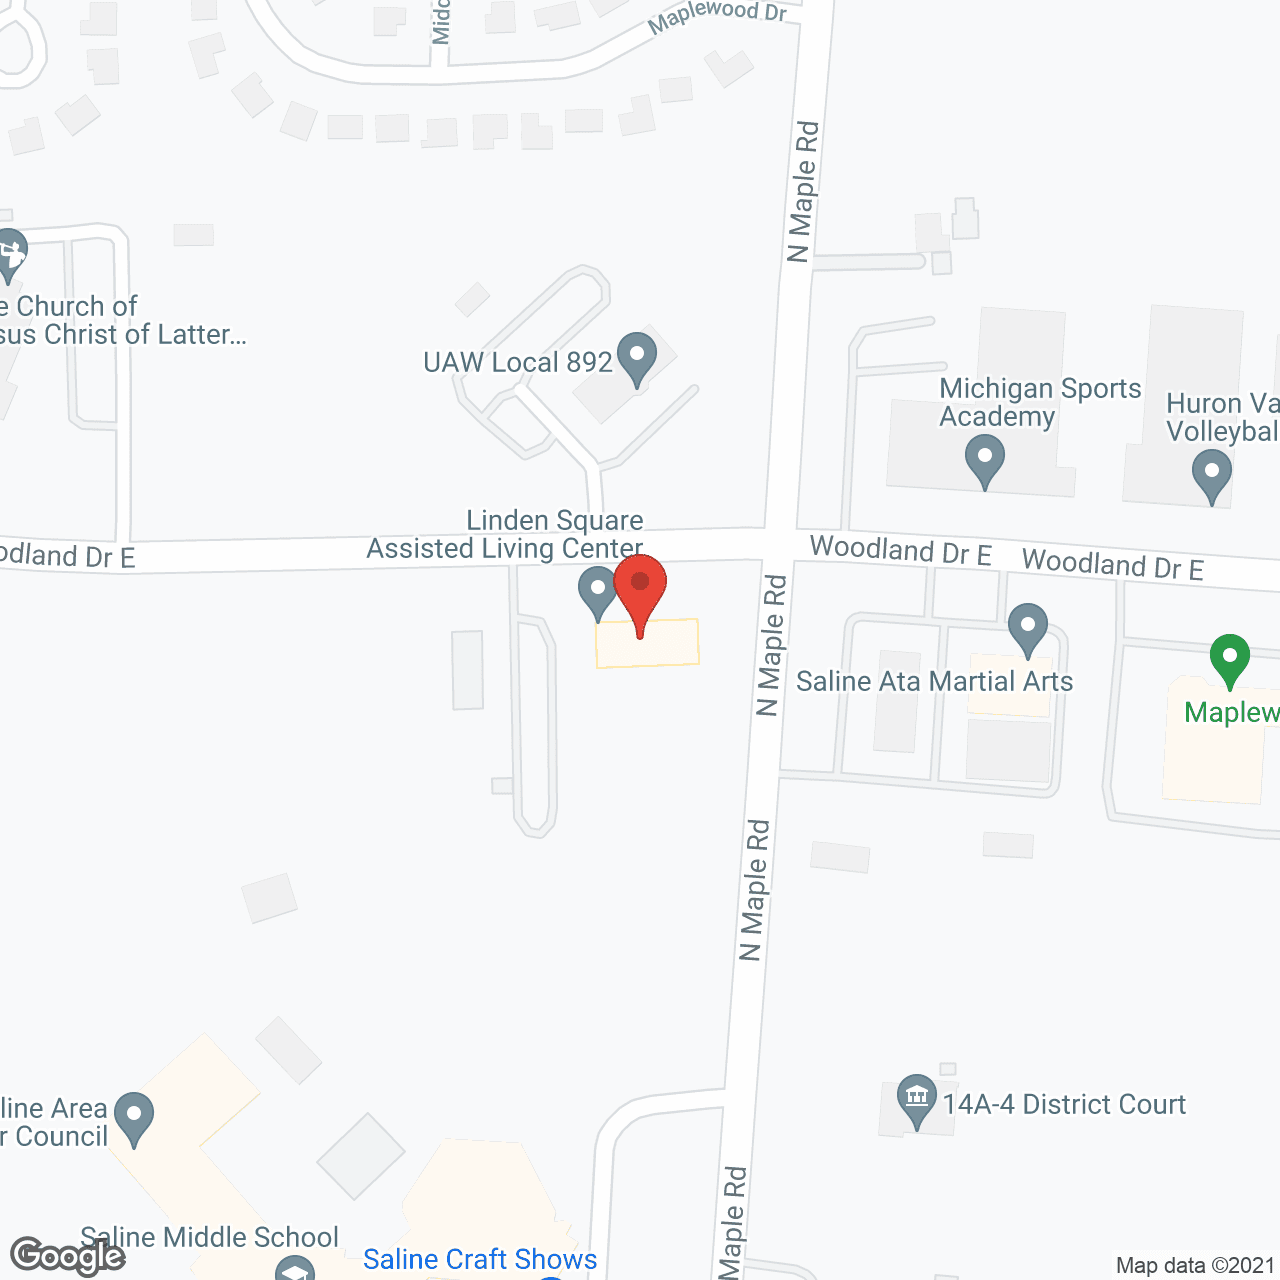 Linden Square Assisted Living Center in google map